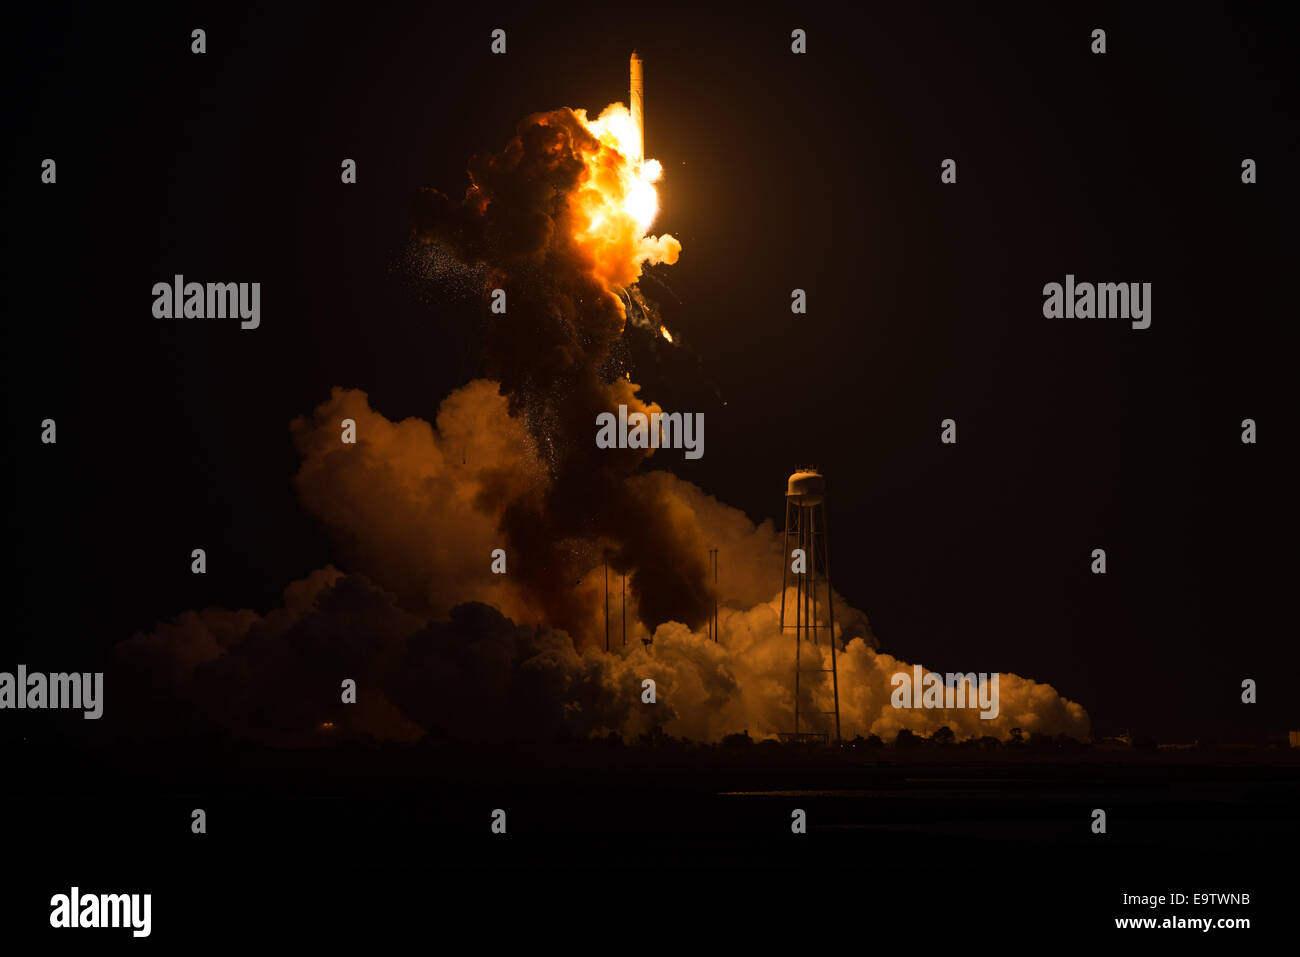 The Orbital Sciences Corporation Antares rocket, with the Cygnus spacecraft onboard suffers a catastrophic anomaly moments after launch from the Mid-Atlantic Regional Spaceport Pad 0A, Tuesday, Oct. 28, 2014, at NASA's Wallops Flight Facility in Virginia. Stock Photo